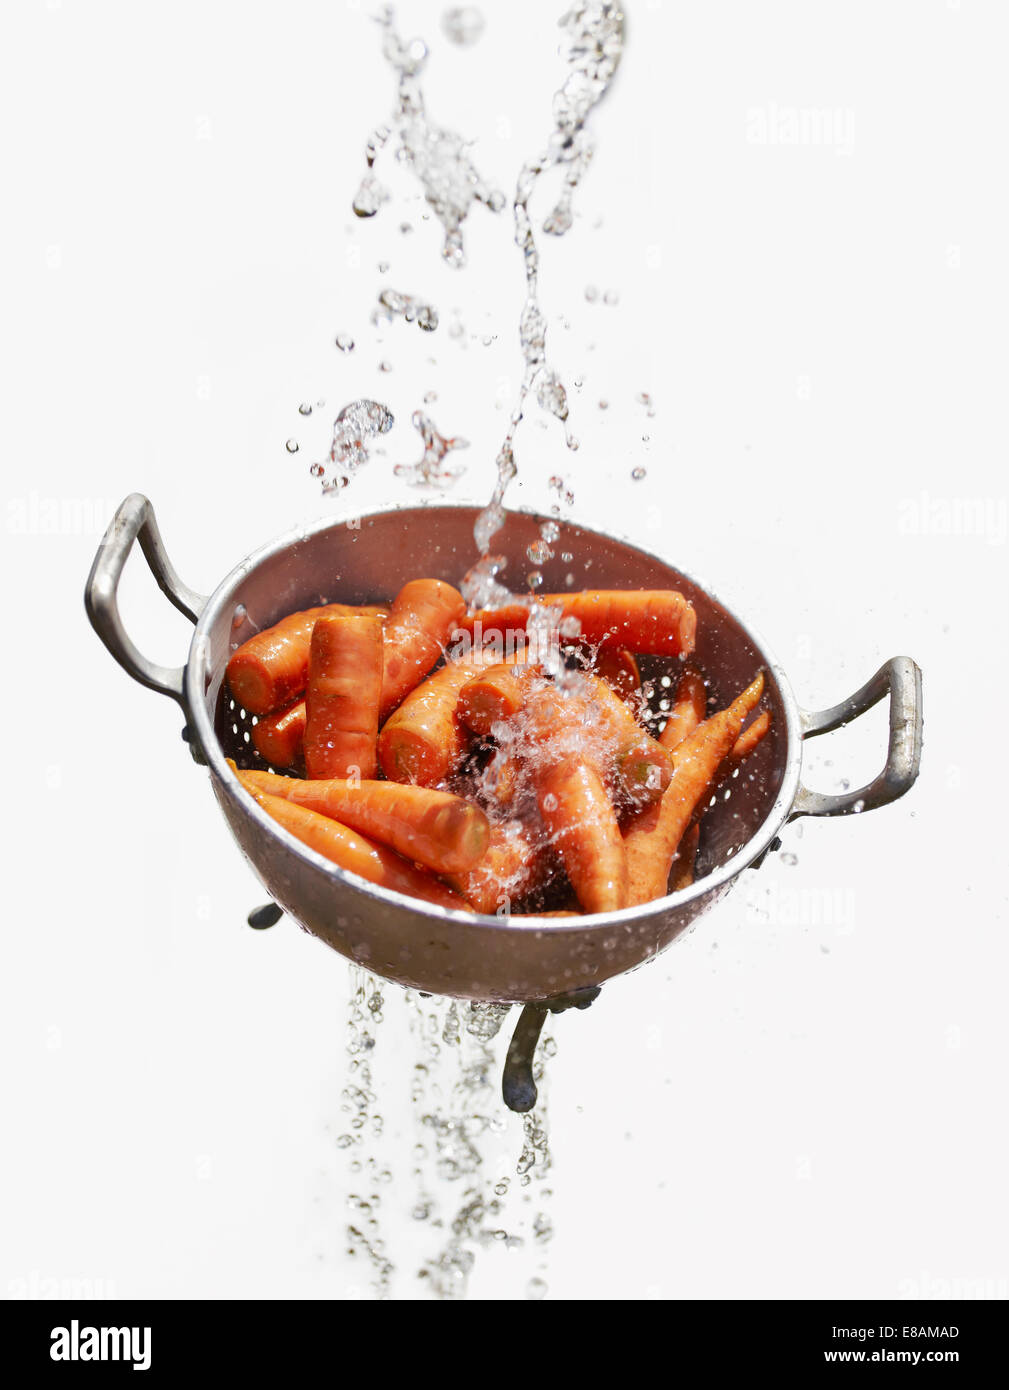 Water falling through colander with fresh carrots Stock Photo